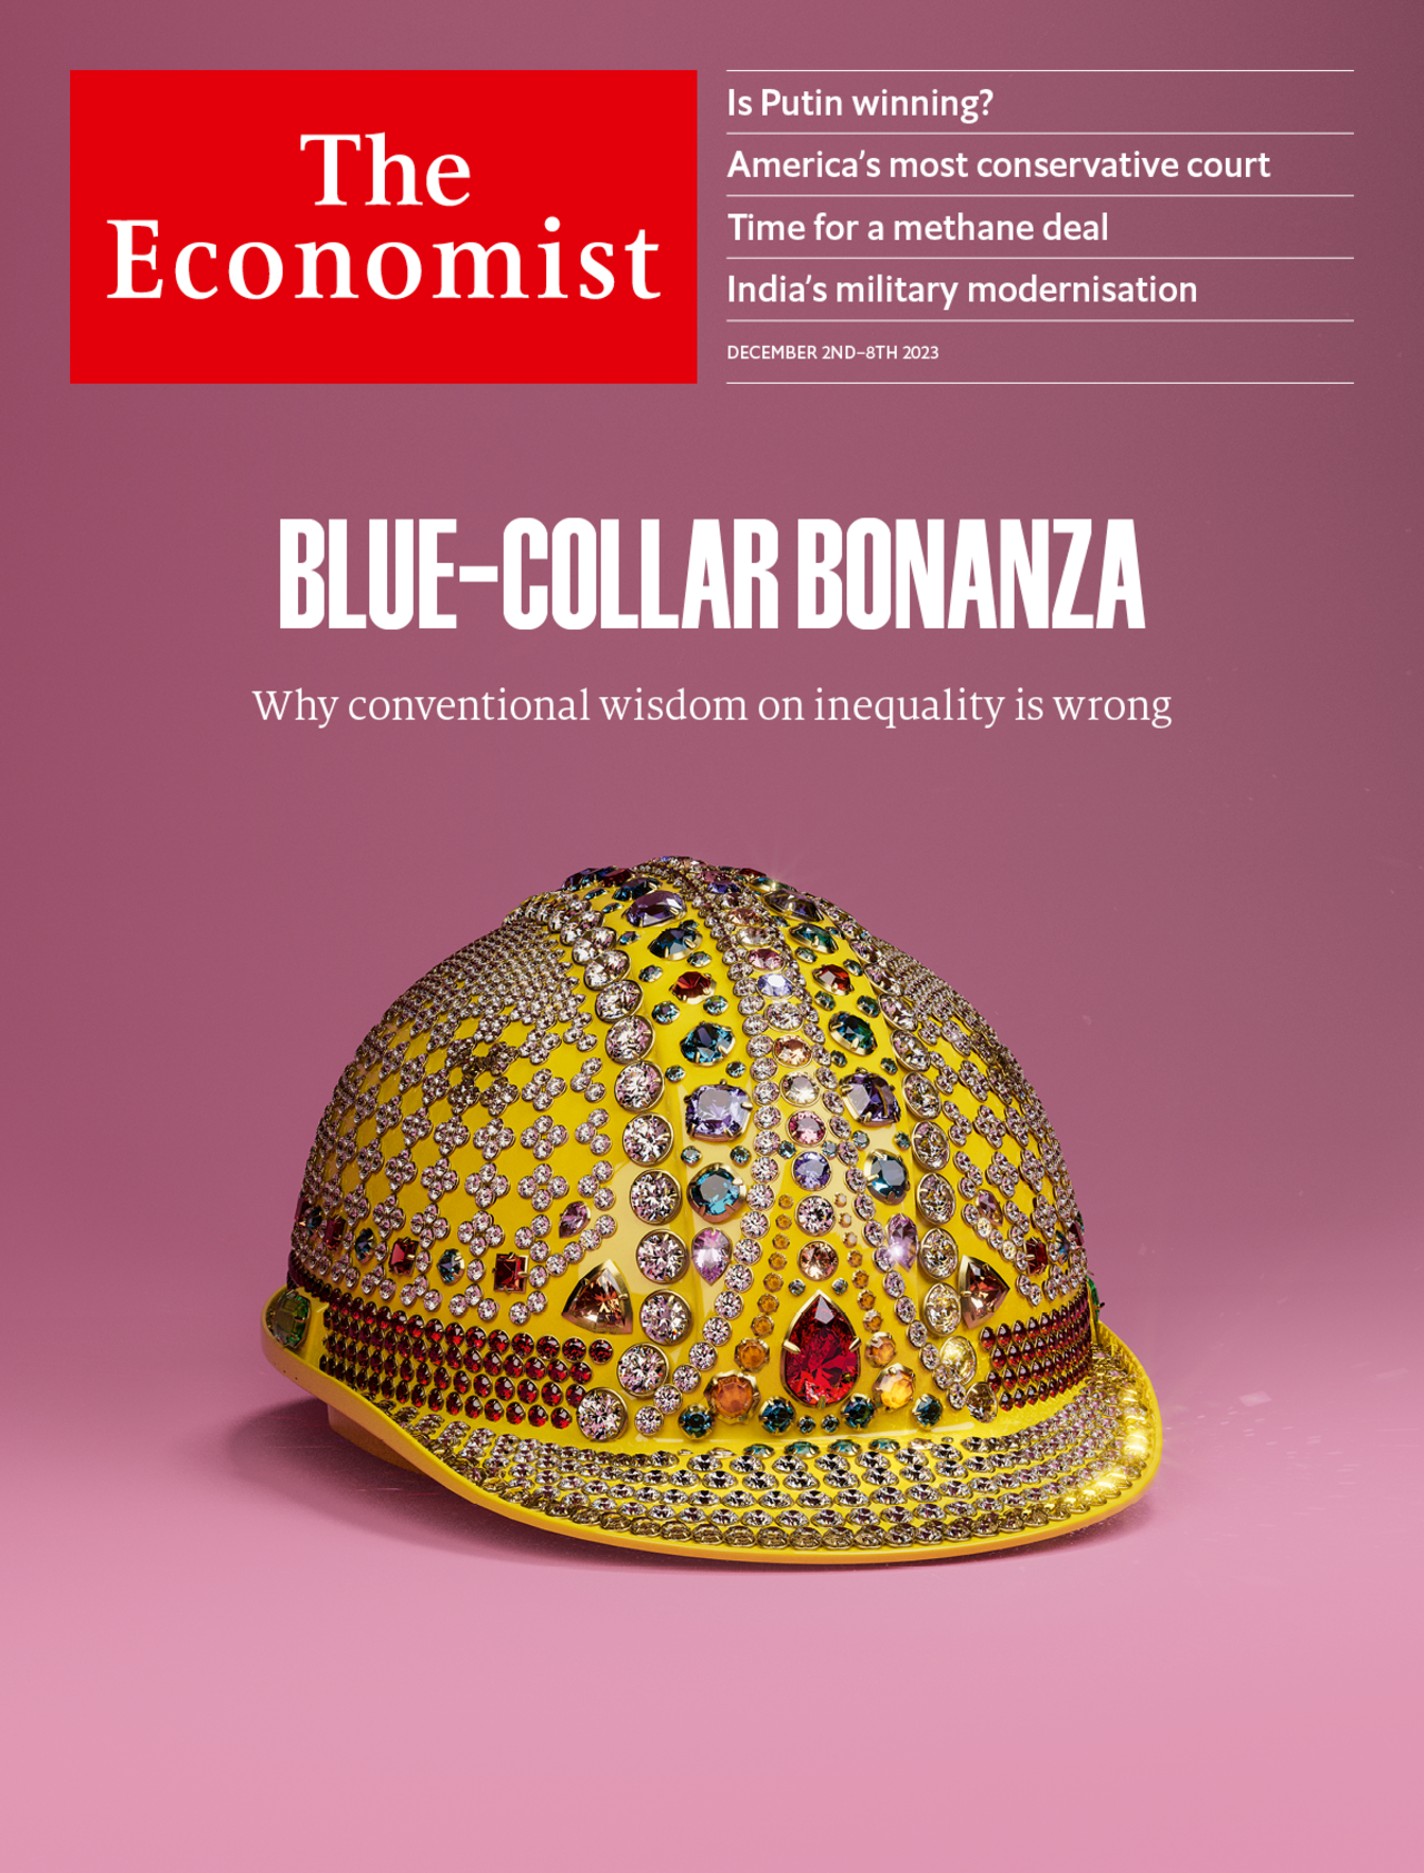 Blue-collar bonanza: Why conventional wisdom on inequality is wrong